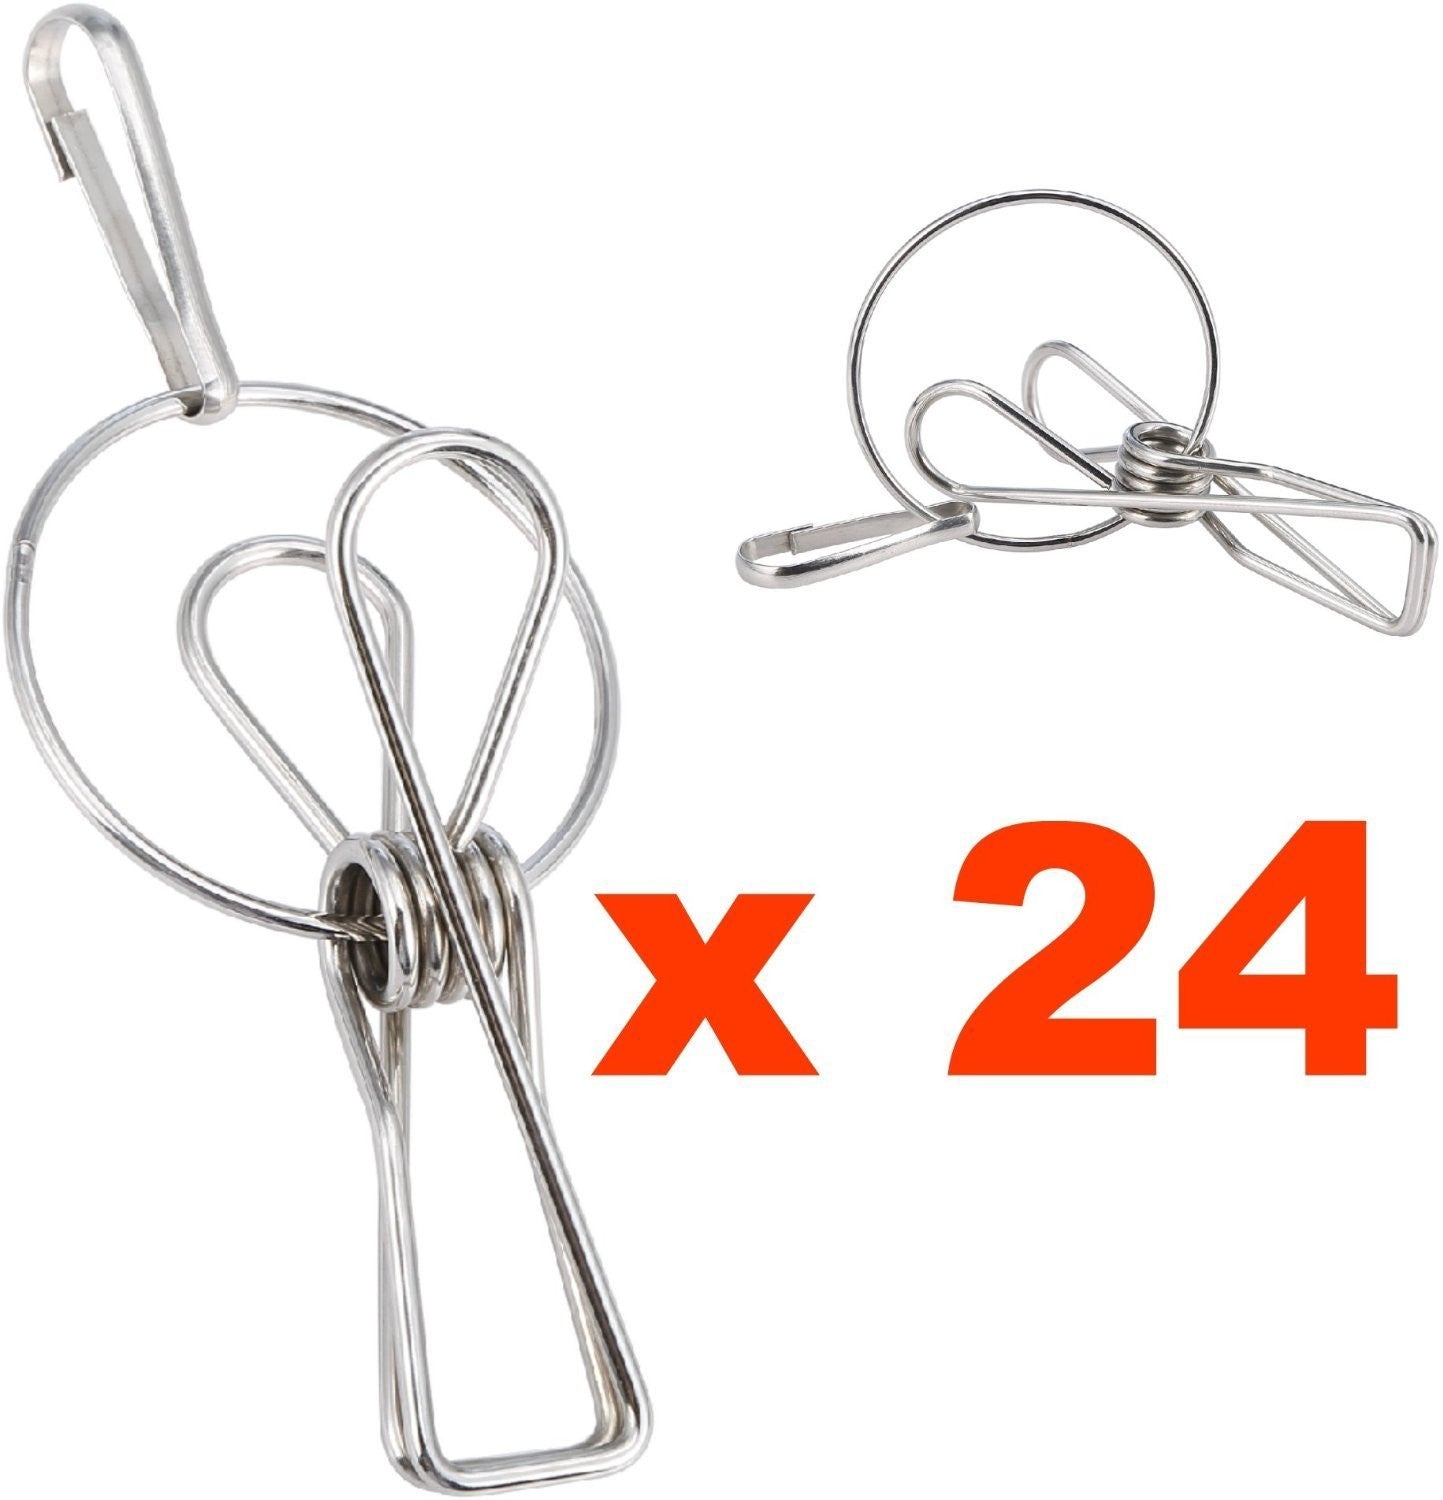 Hanger Clips - Laundry Clothes Pins – Pro Chef Kitchen Tools